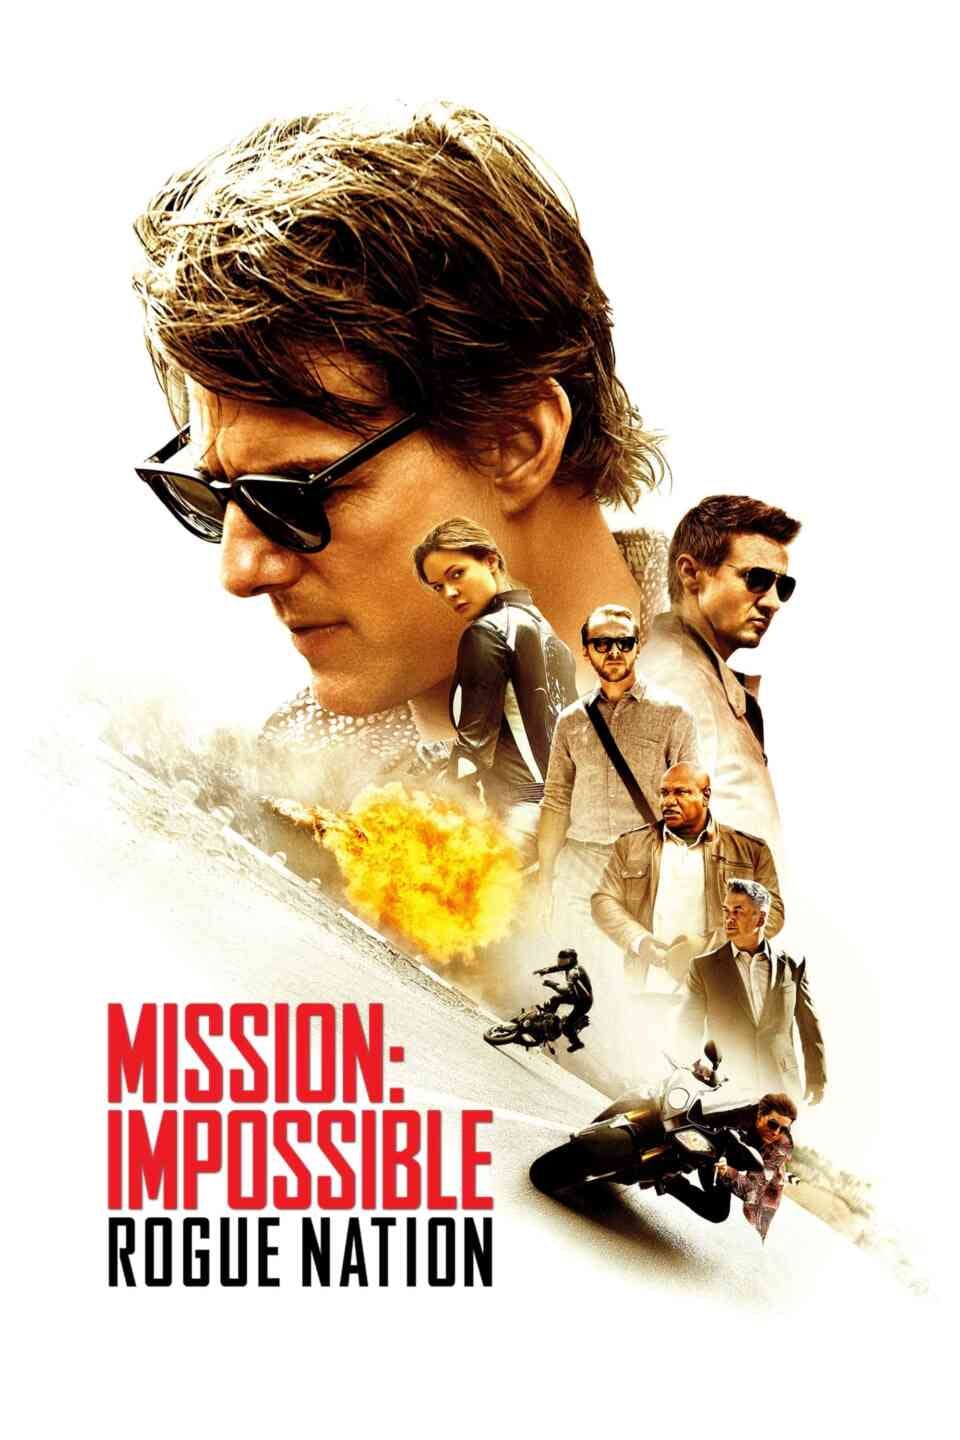 Read Impossible - Rogue Nation screenplay.